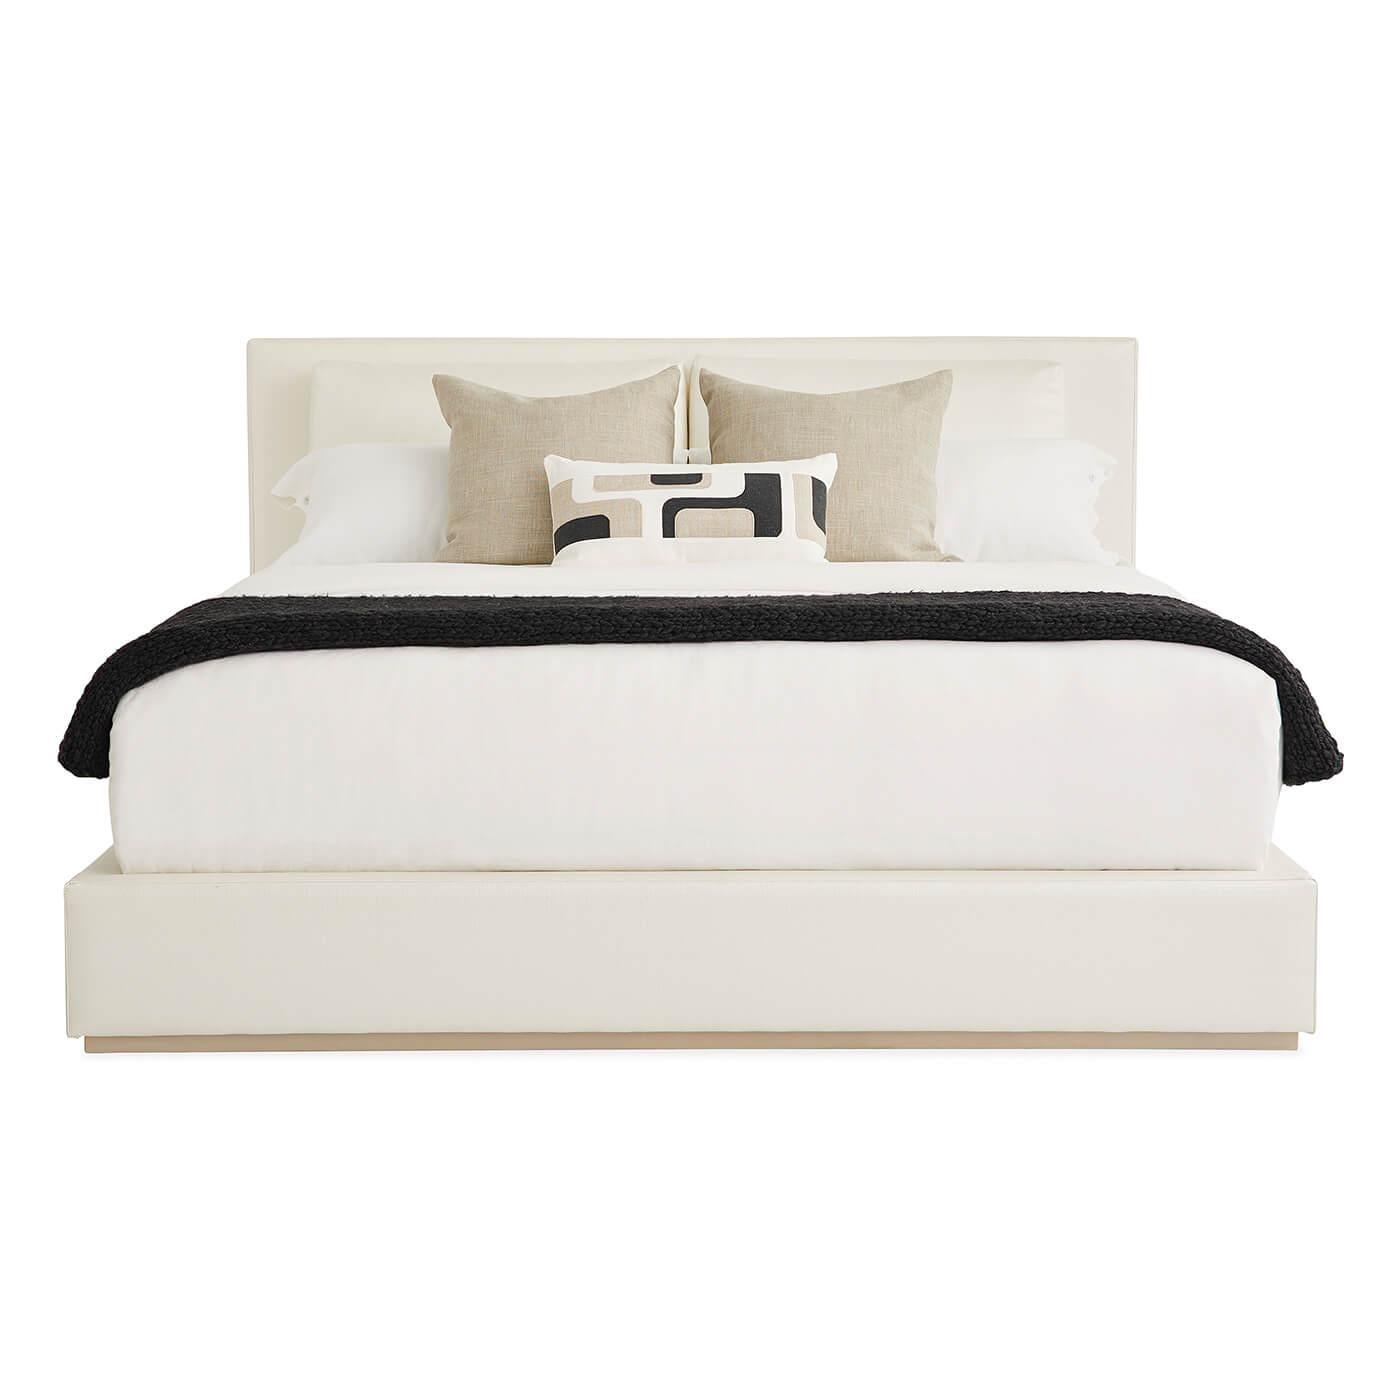 A modern classic upholstered platform king bed. The elegant bed combines the comfort of your favorite refined boutique hotel with the authentic charm of a modern Paris apartment. Dressed in crisp white grasscloth textured vinyl, its chic design is a